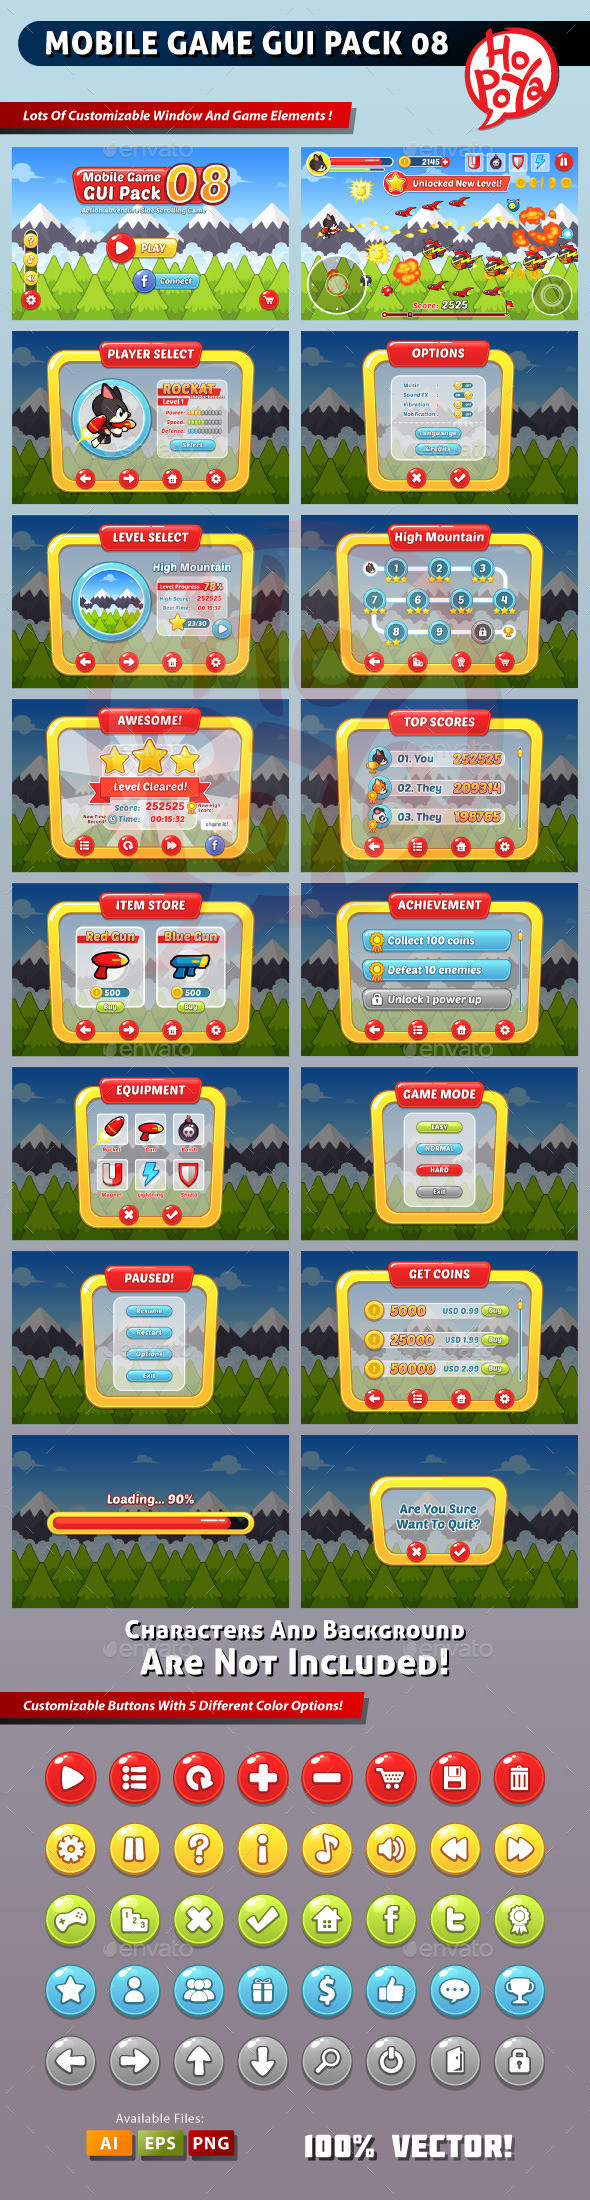 Mobile game gui pack 08 pre